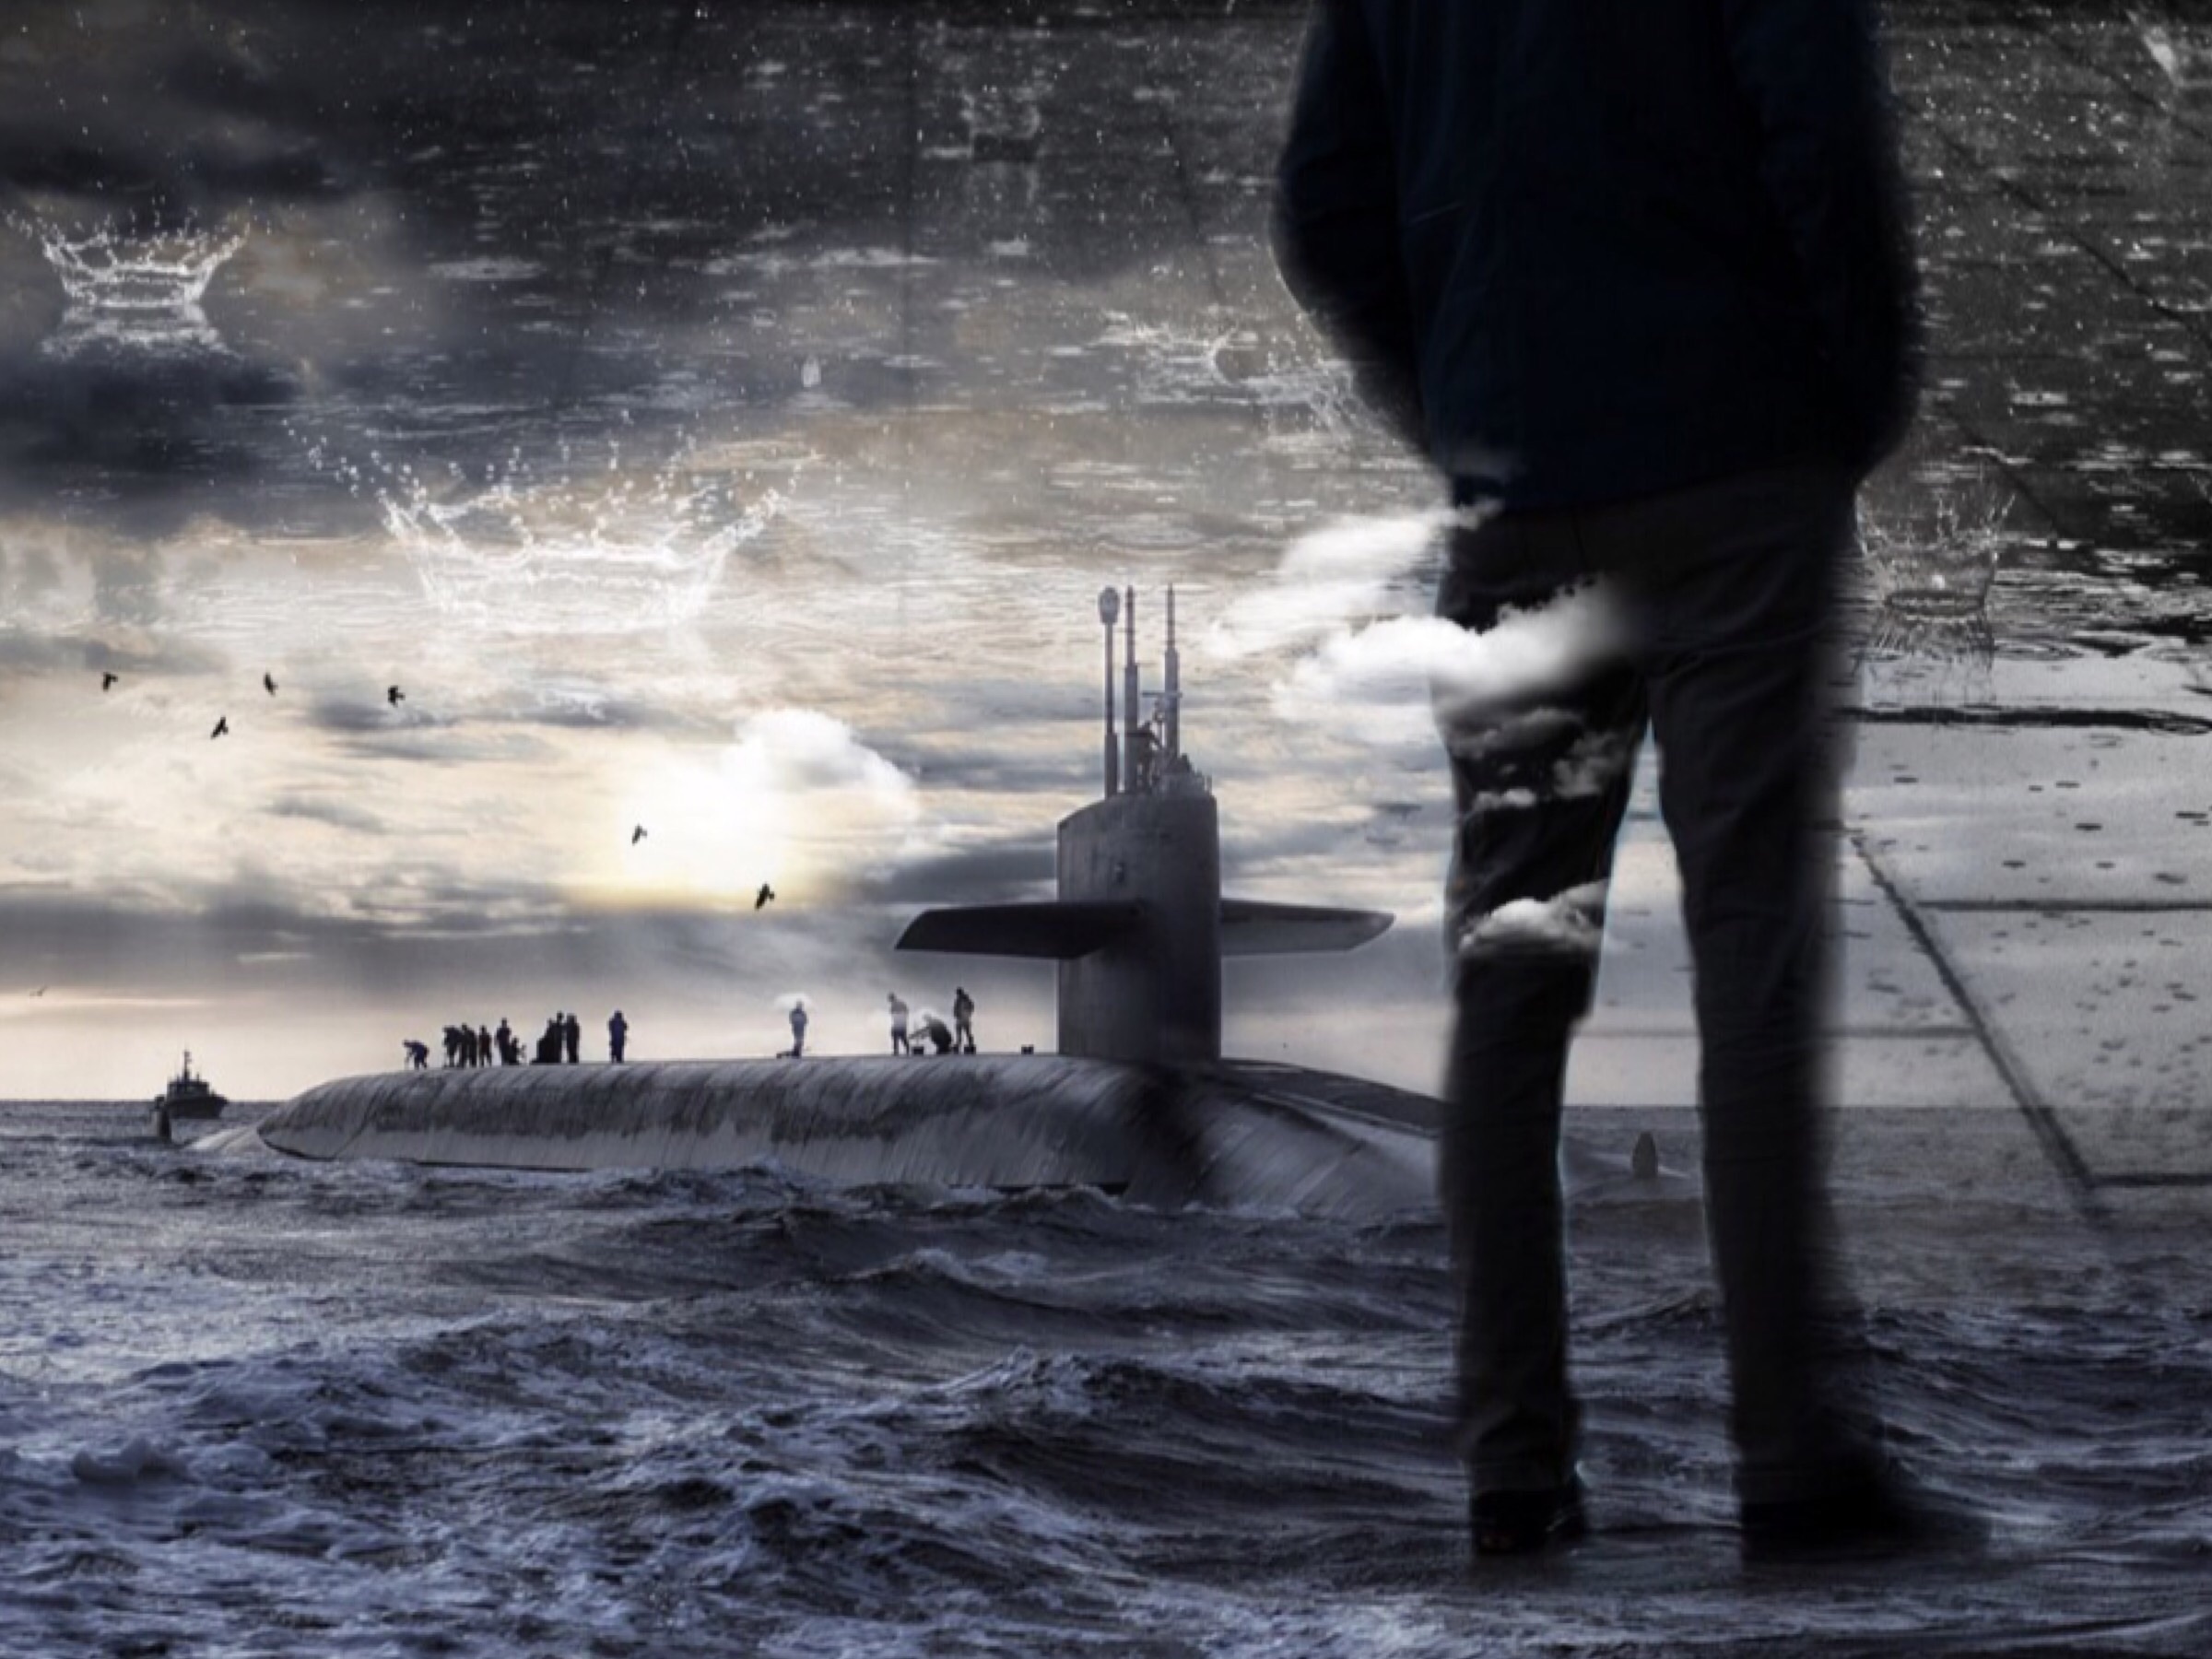 man's silhouette and submarine submerged in water